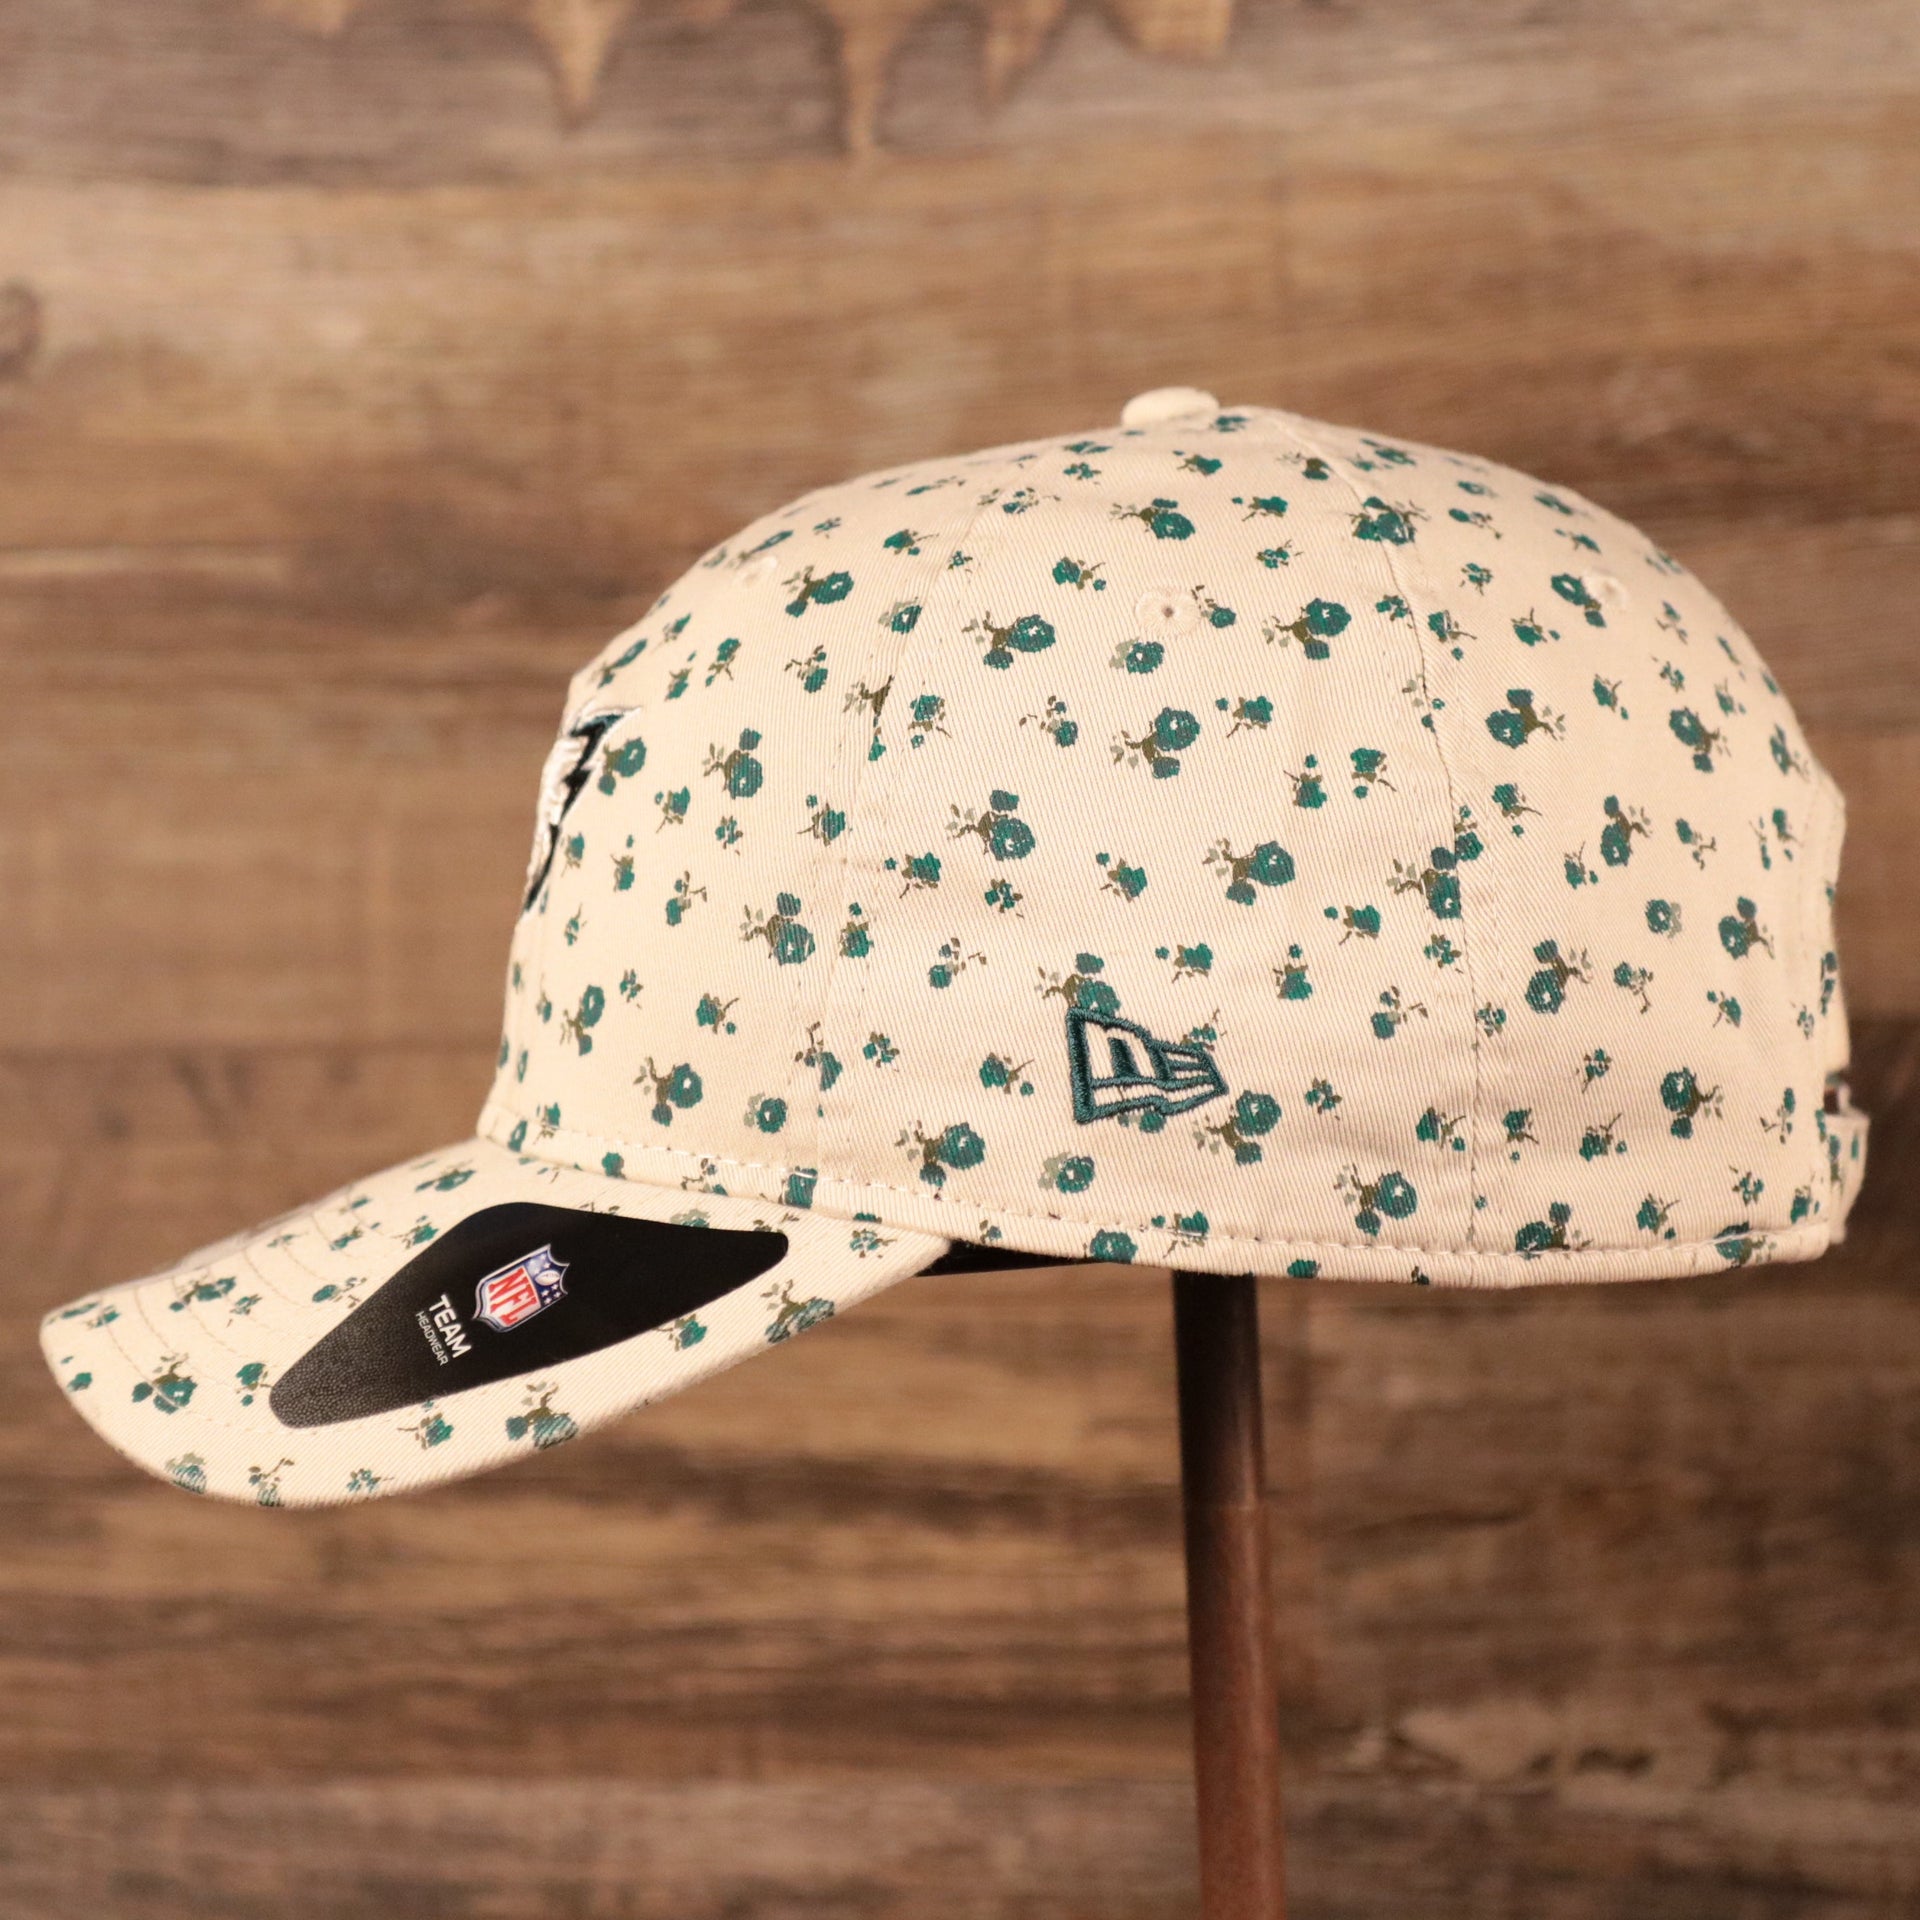 The wearer's left side of the Philadelphia Eagles youth floral baseball hat by New Era.